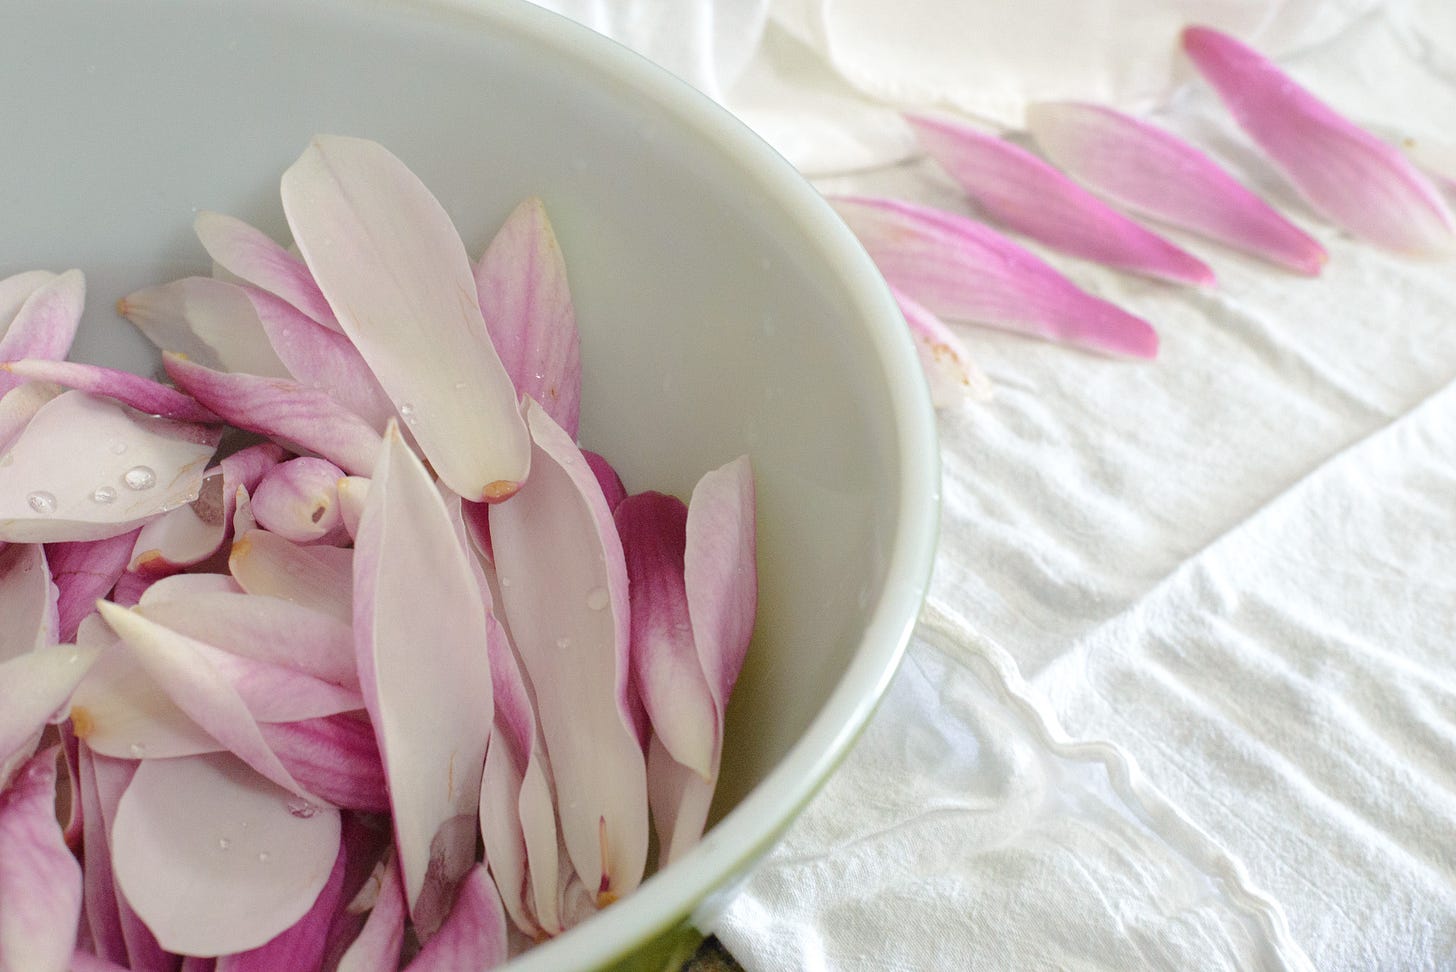 Magnolia petals in a bowl and lined up on a dish towel